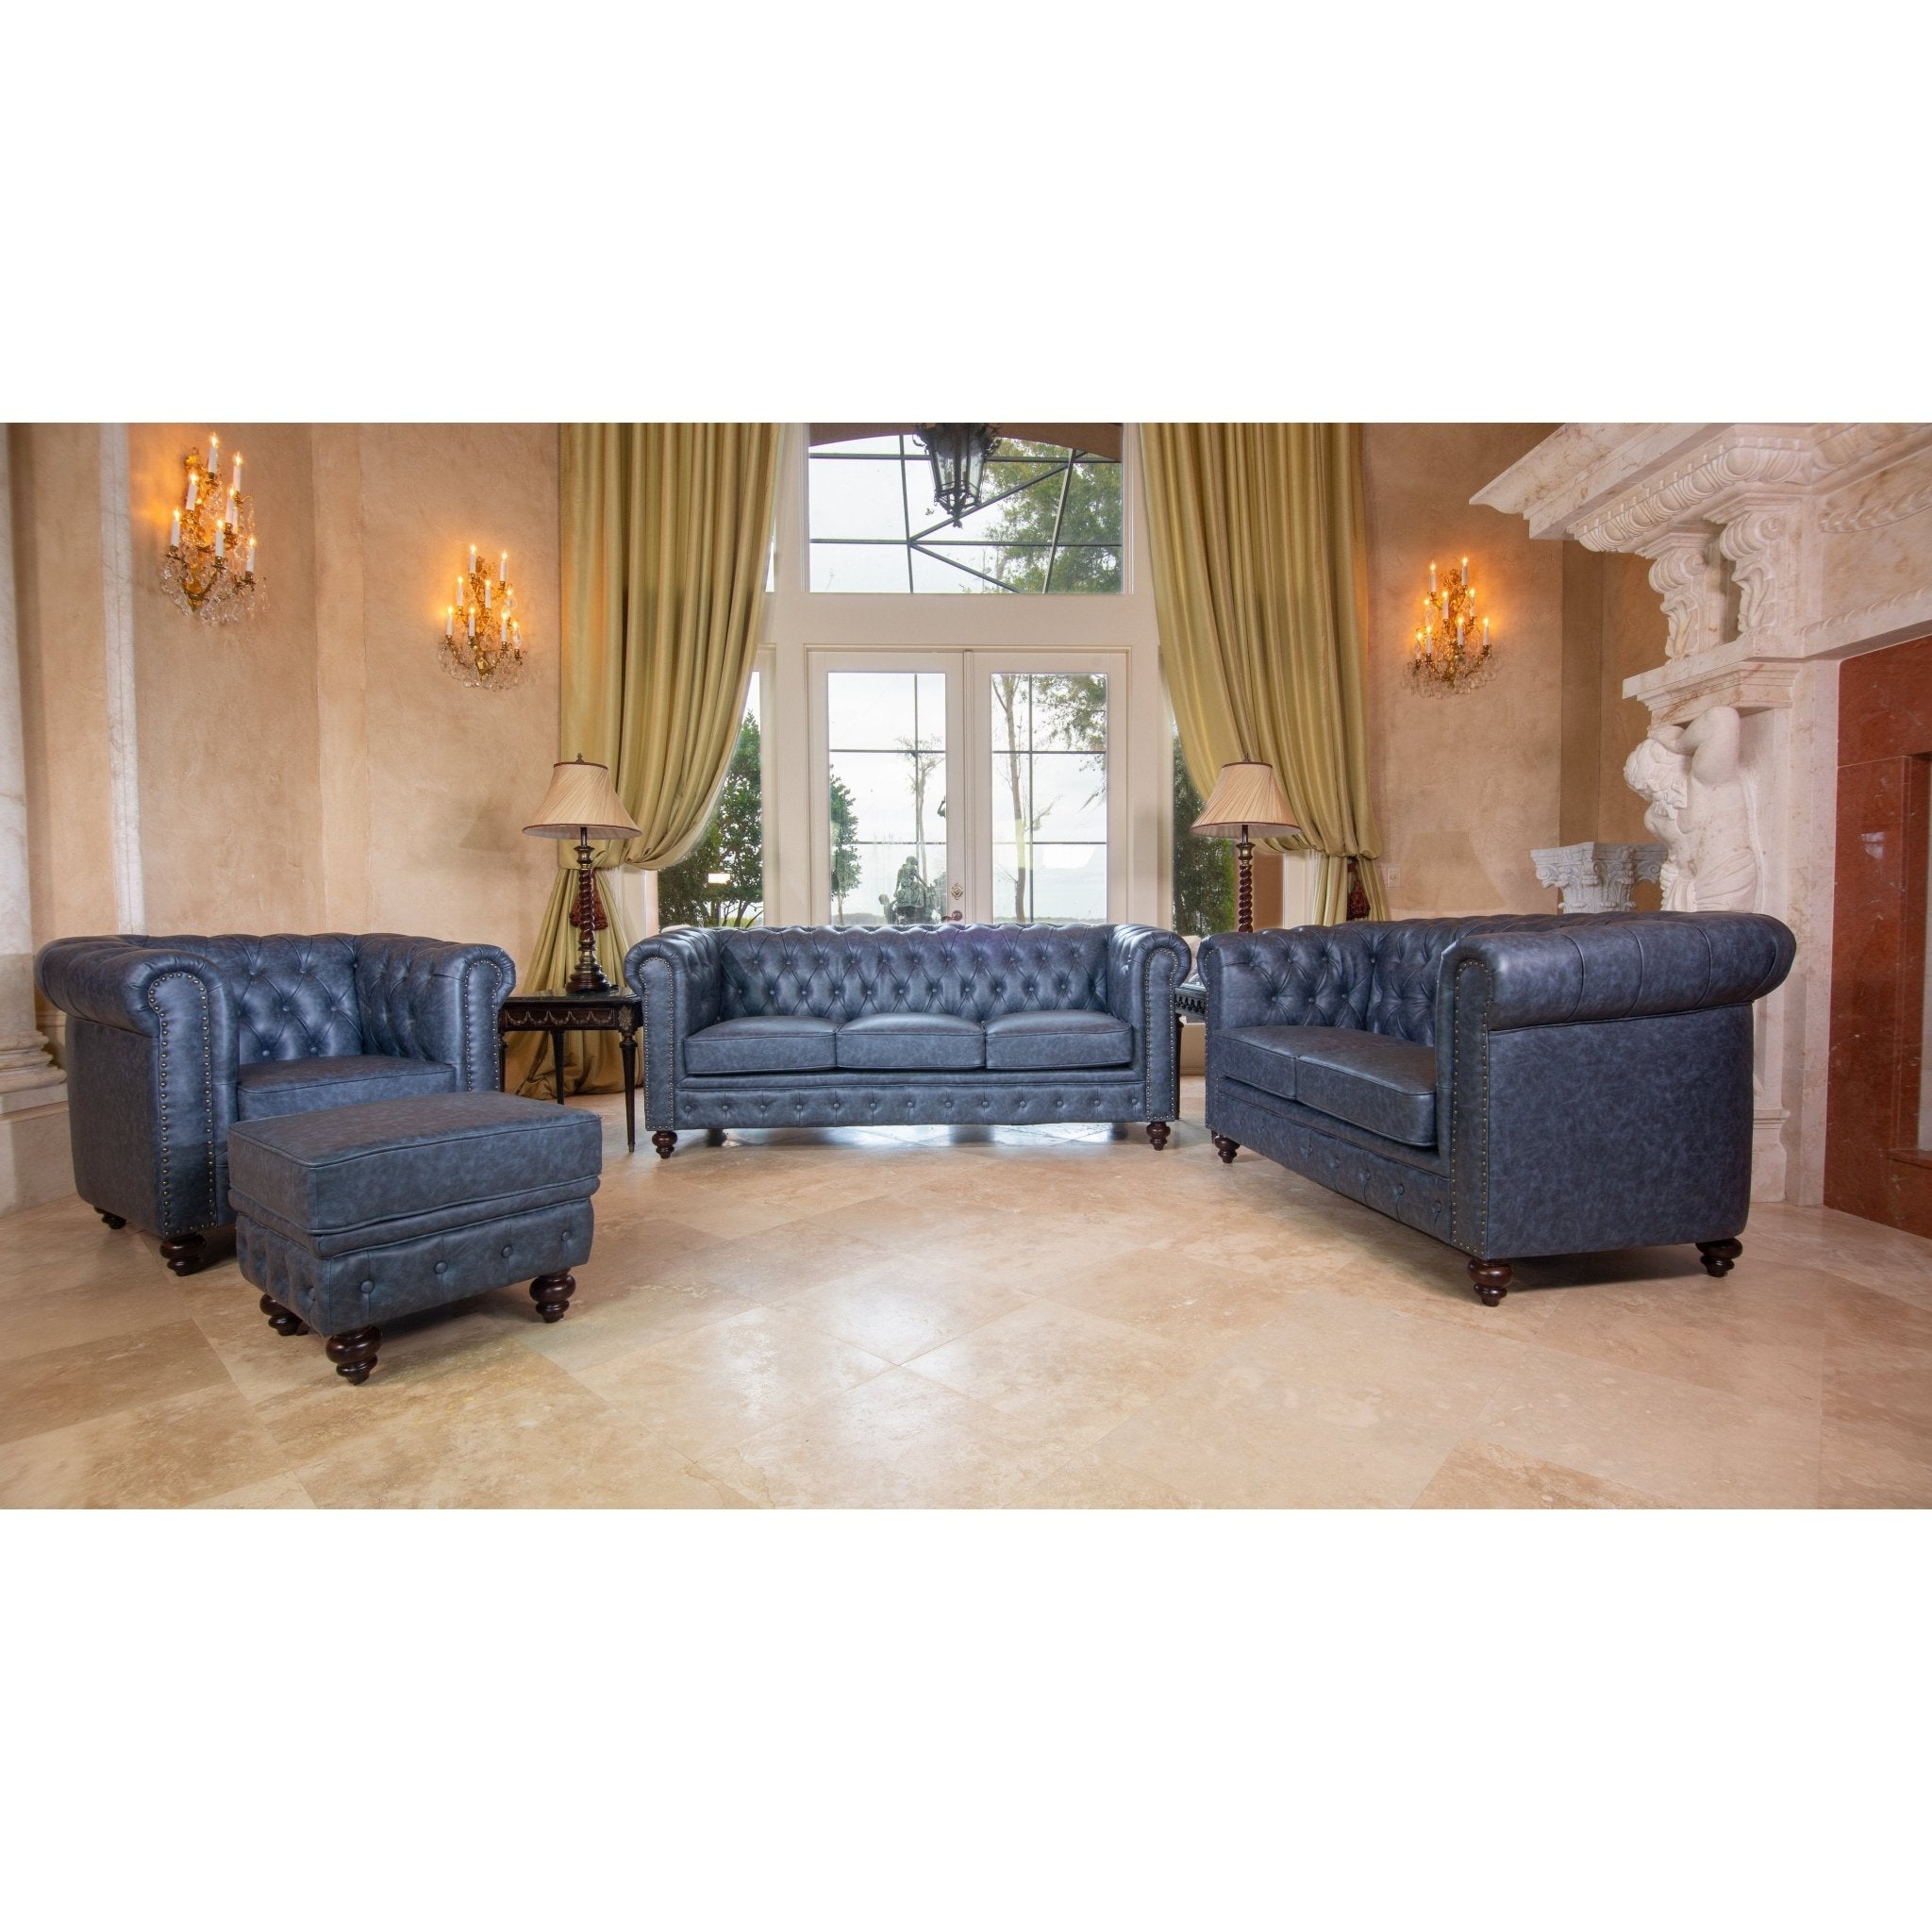 AFD Home Classic Chesterfield Gray Blue Sofa Set of 3 - New Star Living